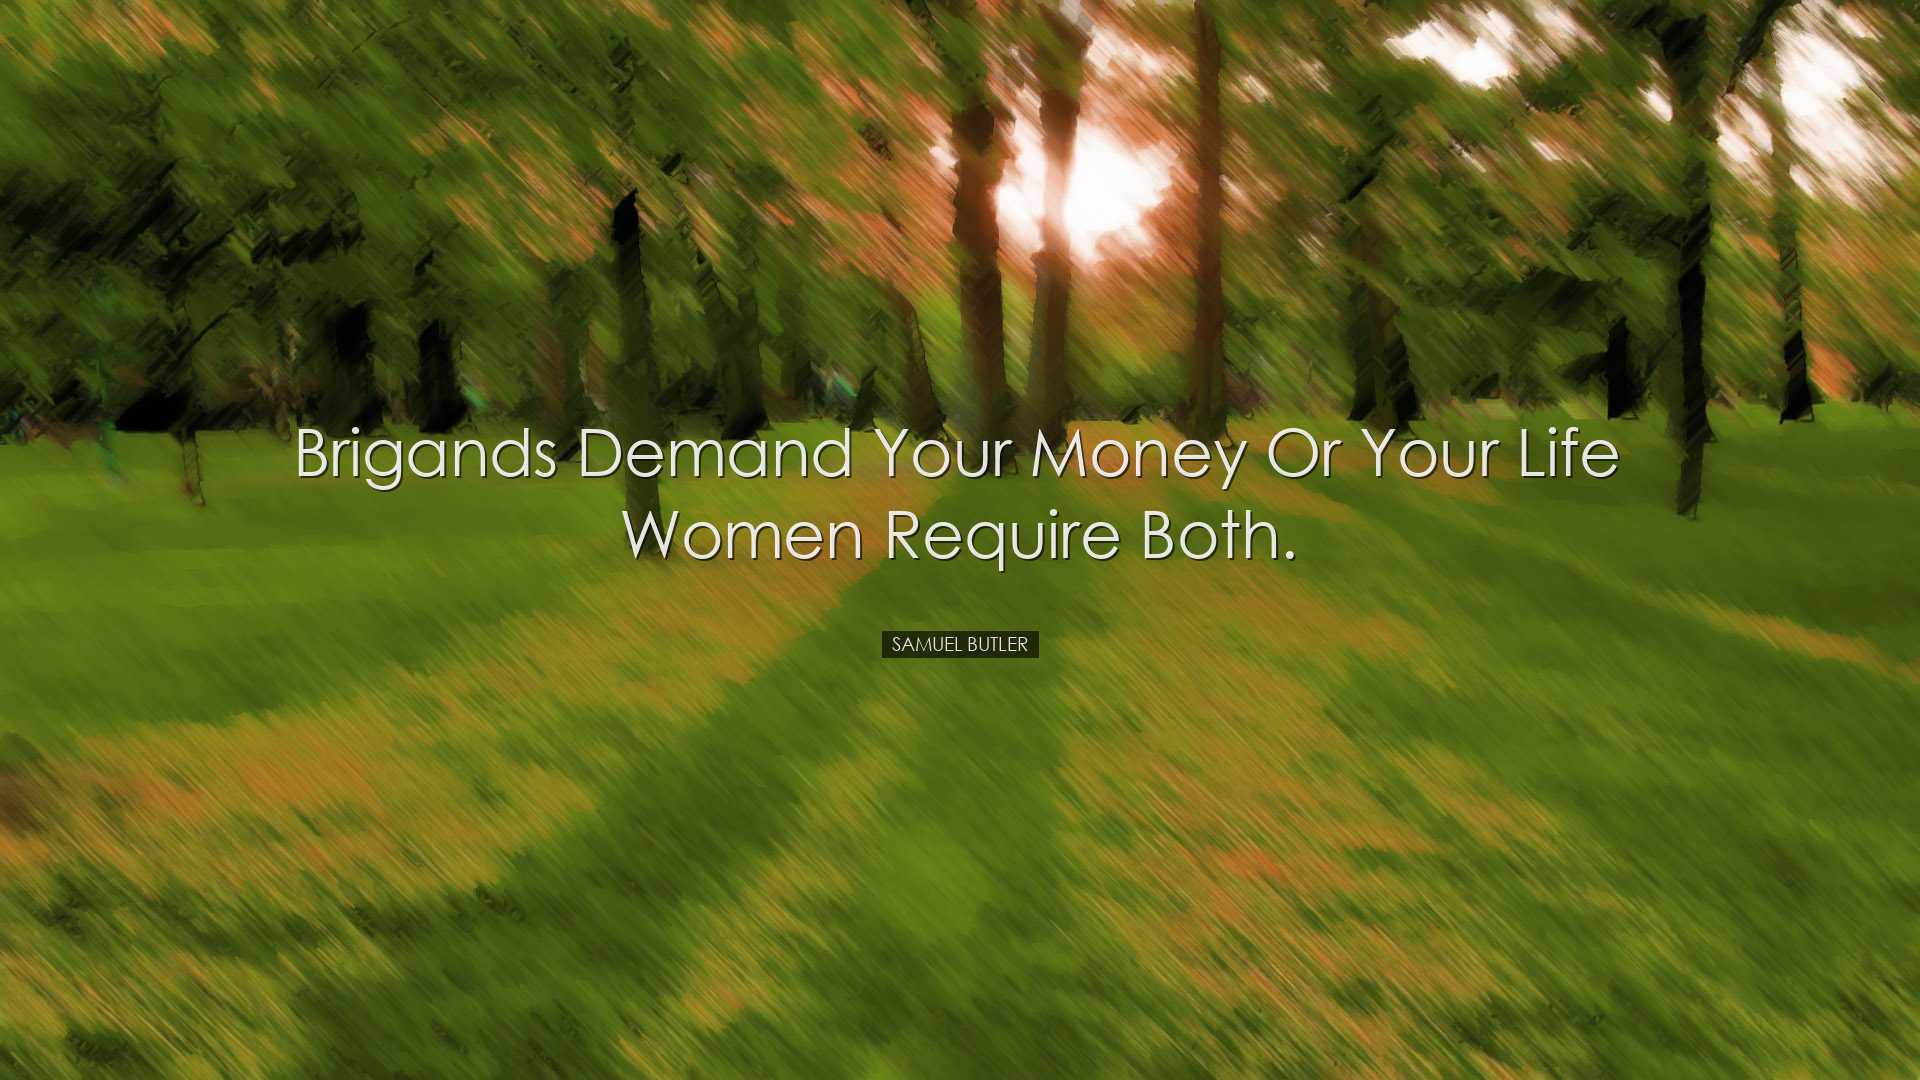 Brigands demand your money or your life women require both. - Samu